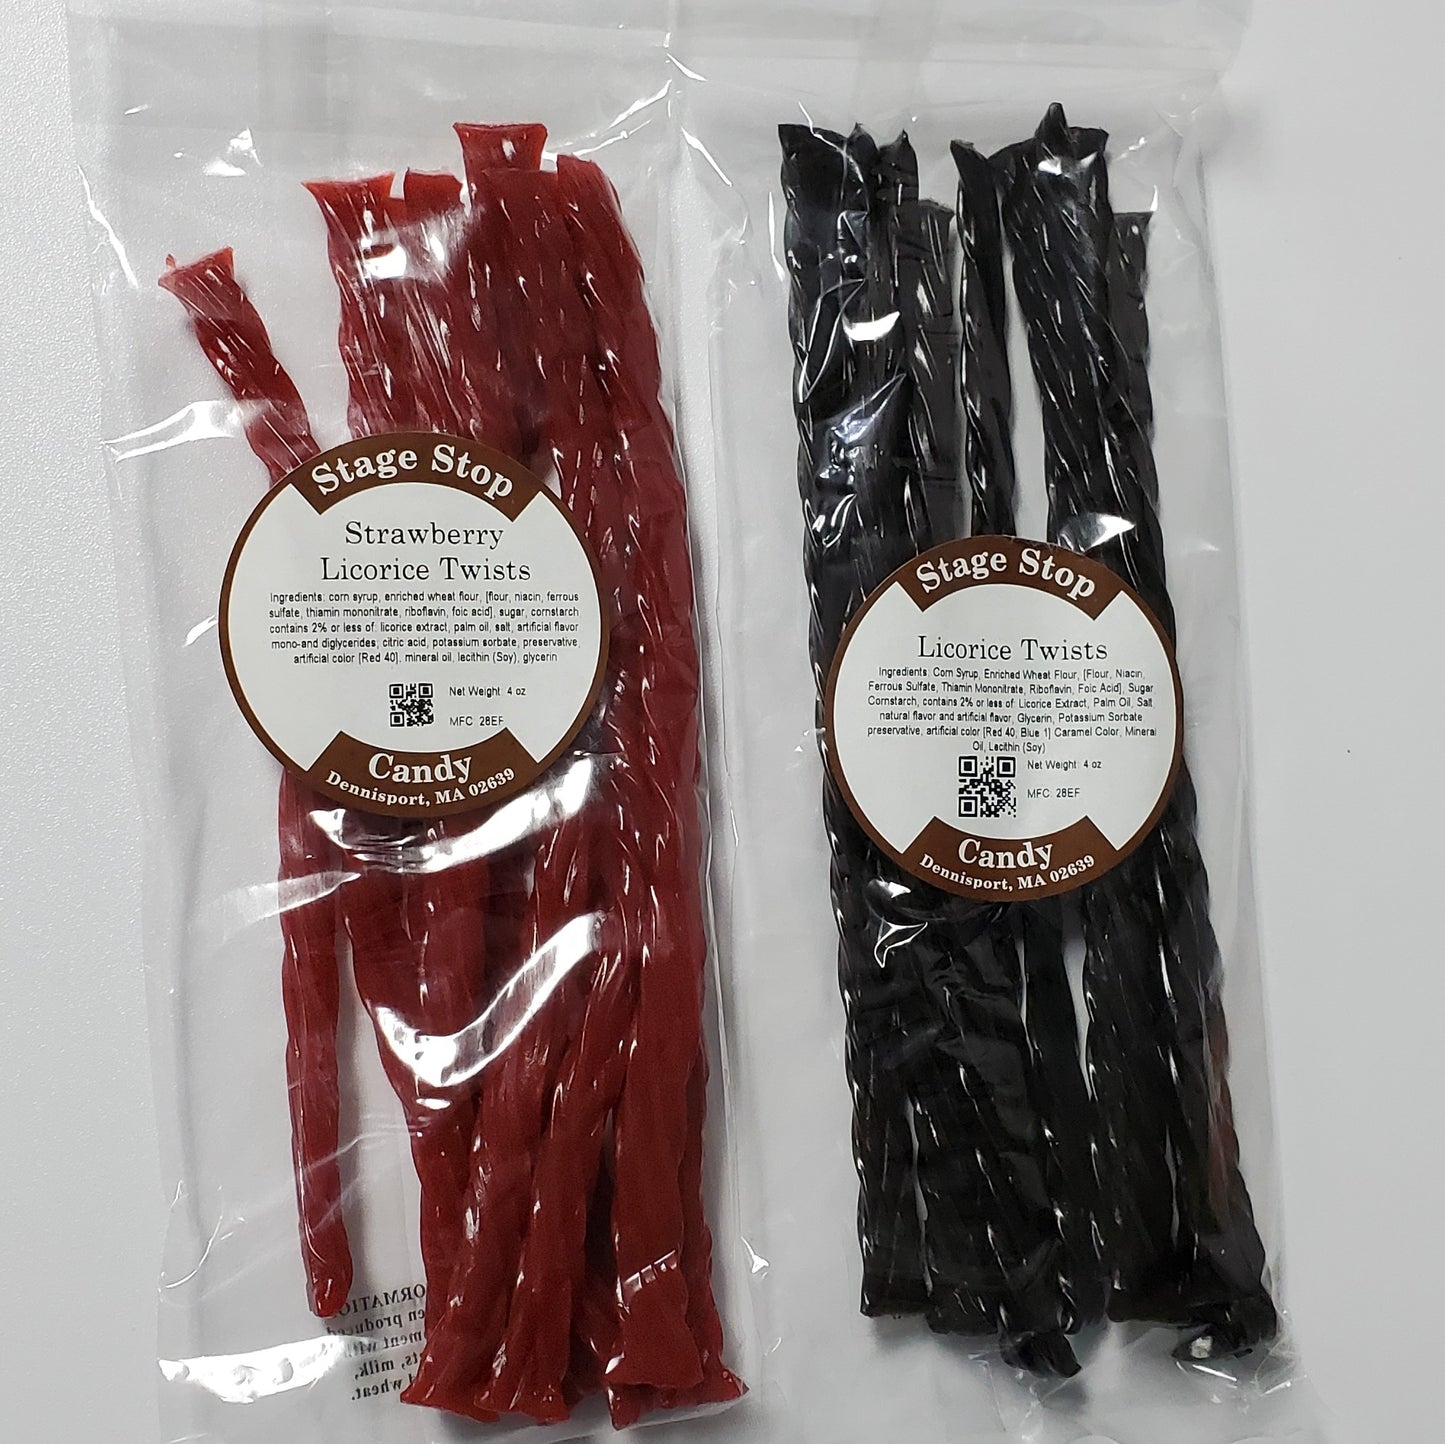 Bags of Licorice Twists